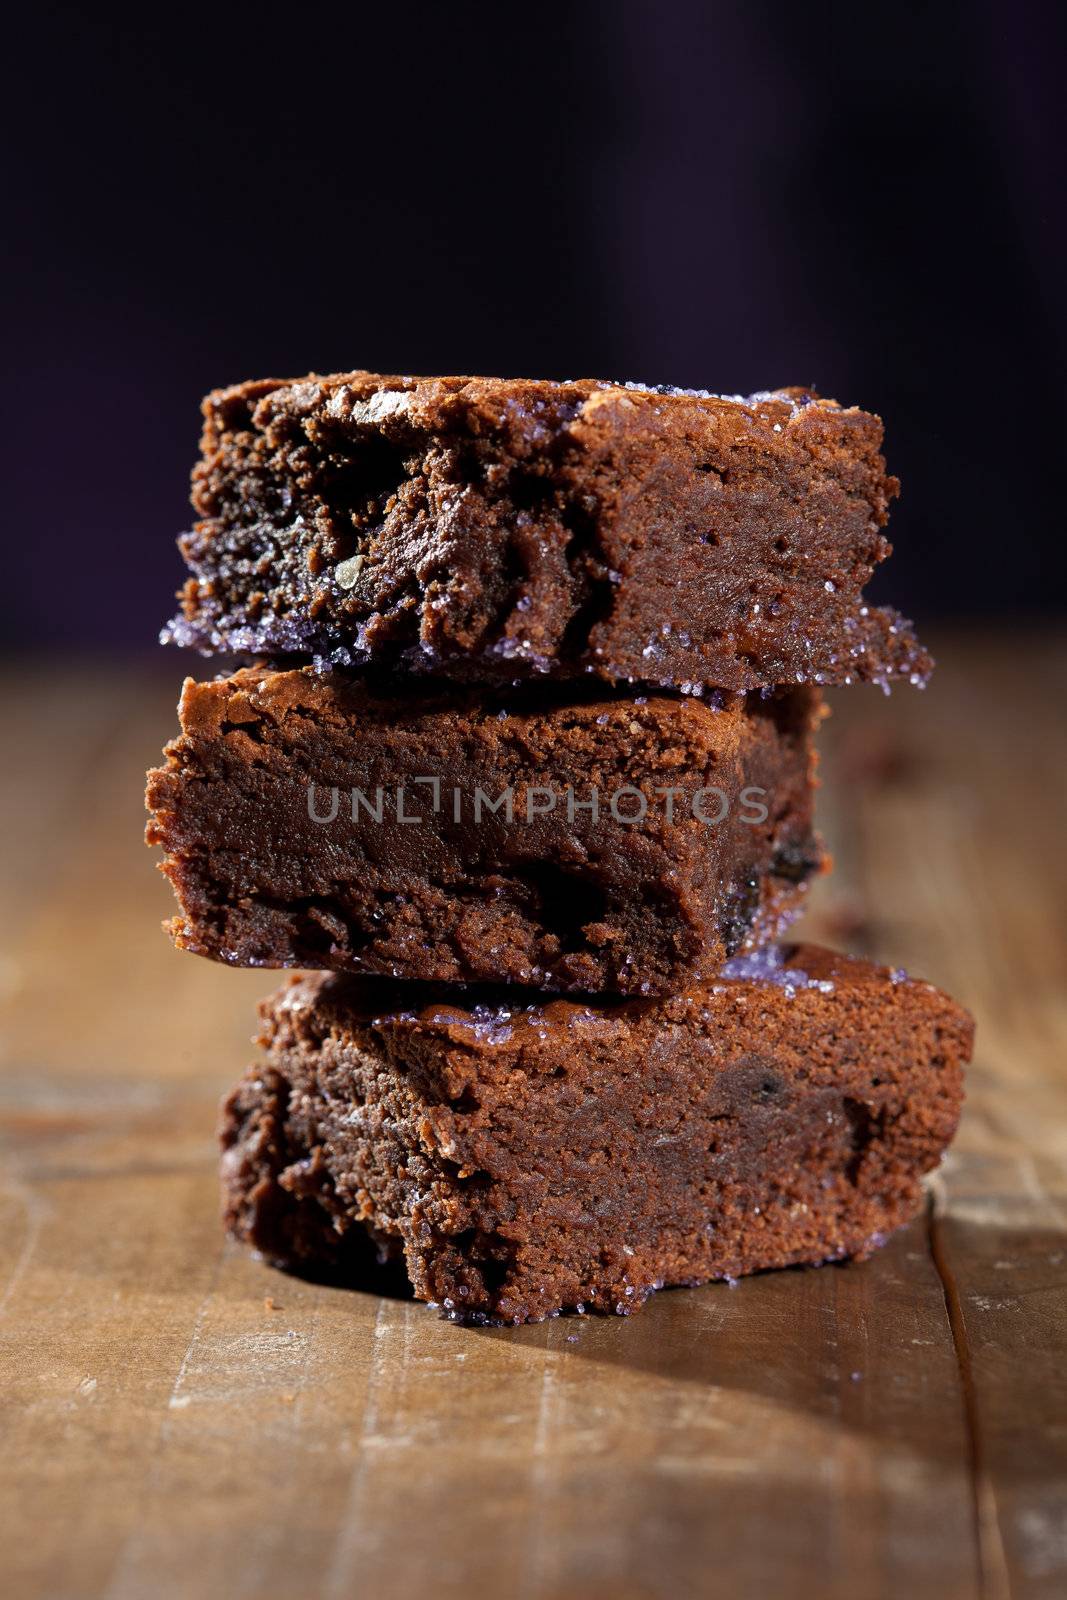 Delicious lavender chocolate brownies